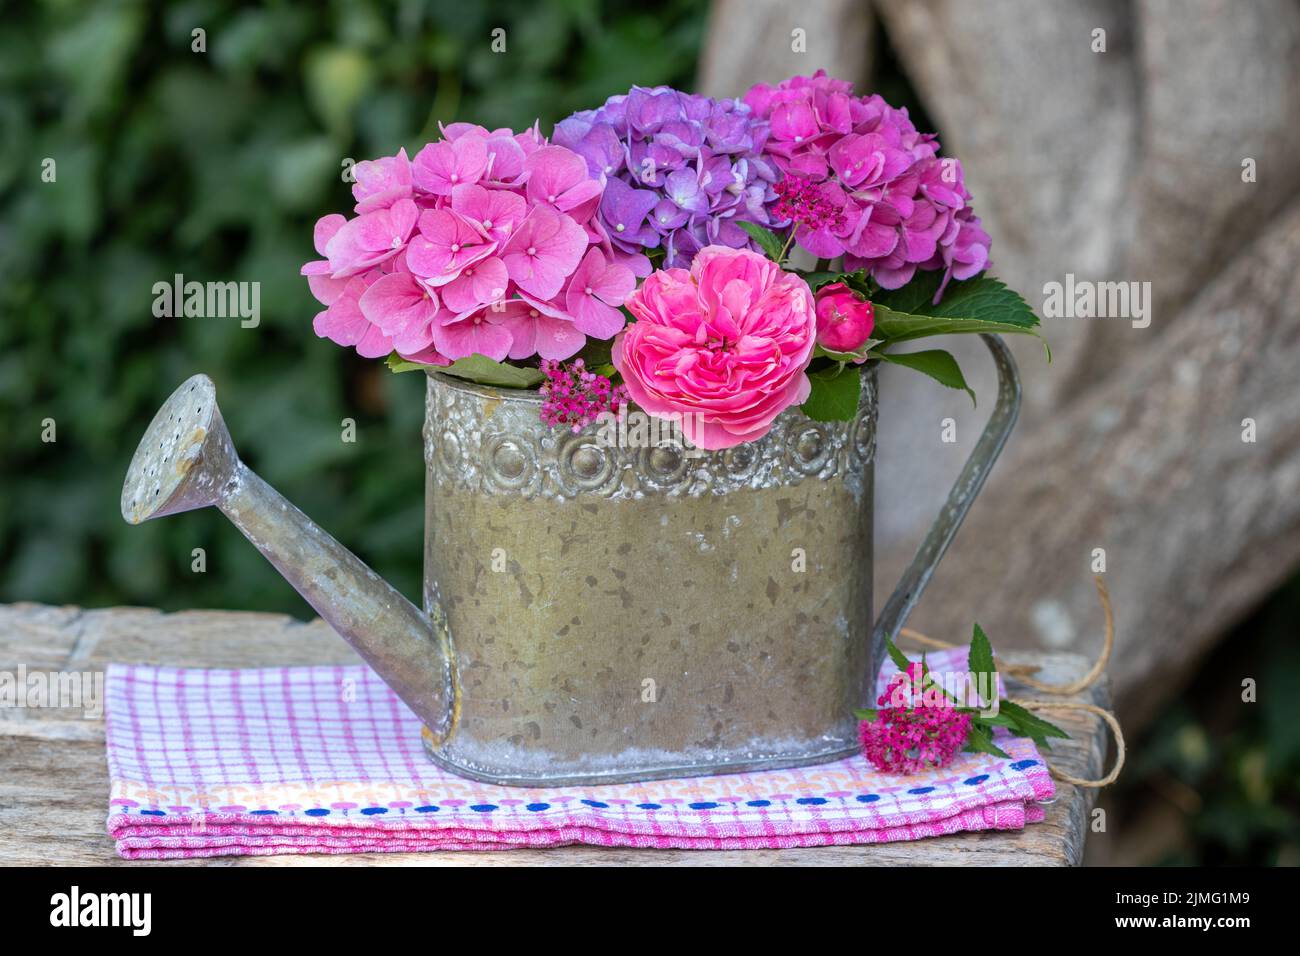 bouquet of pink rose and hydrangea flowers in decorative watering can Stock Photo